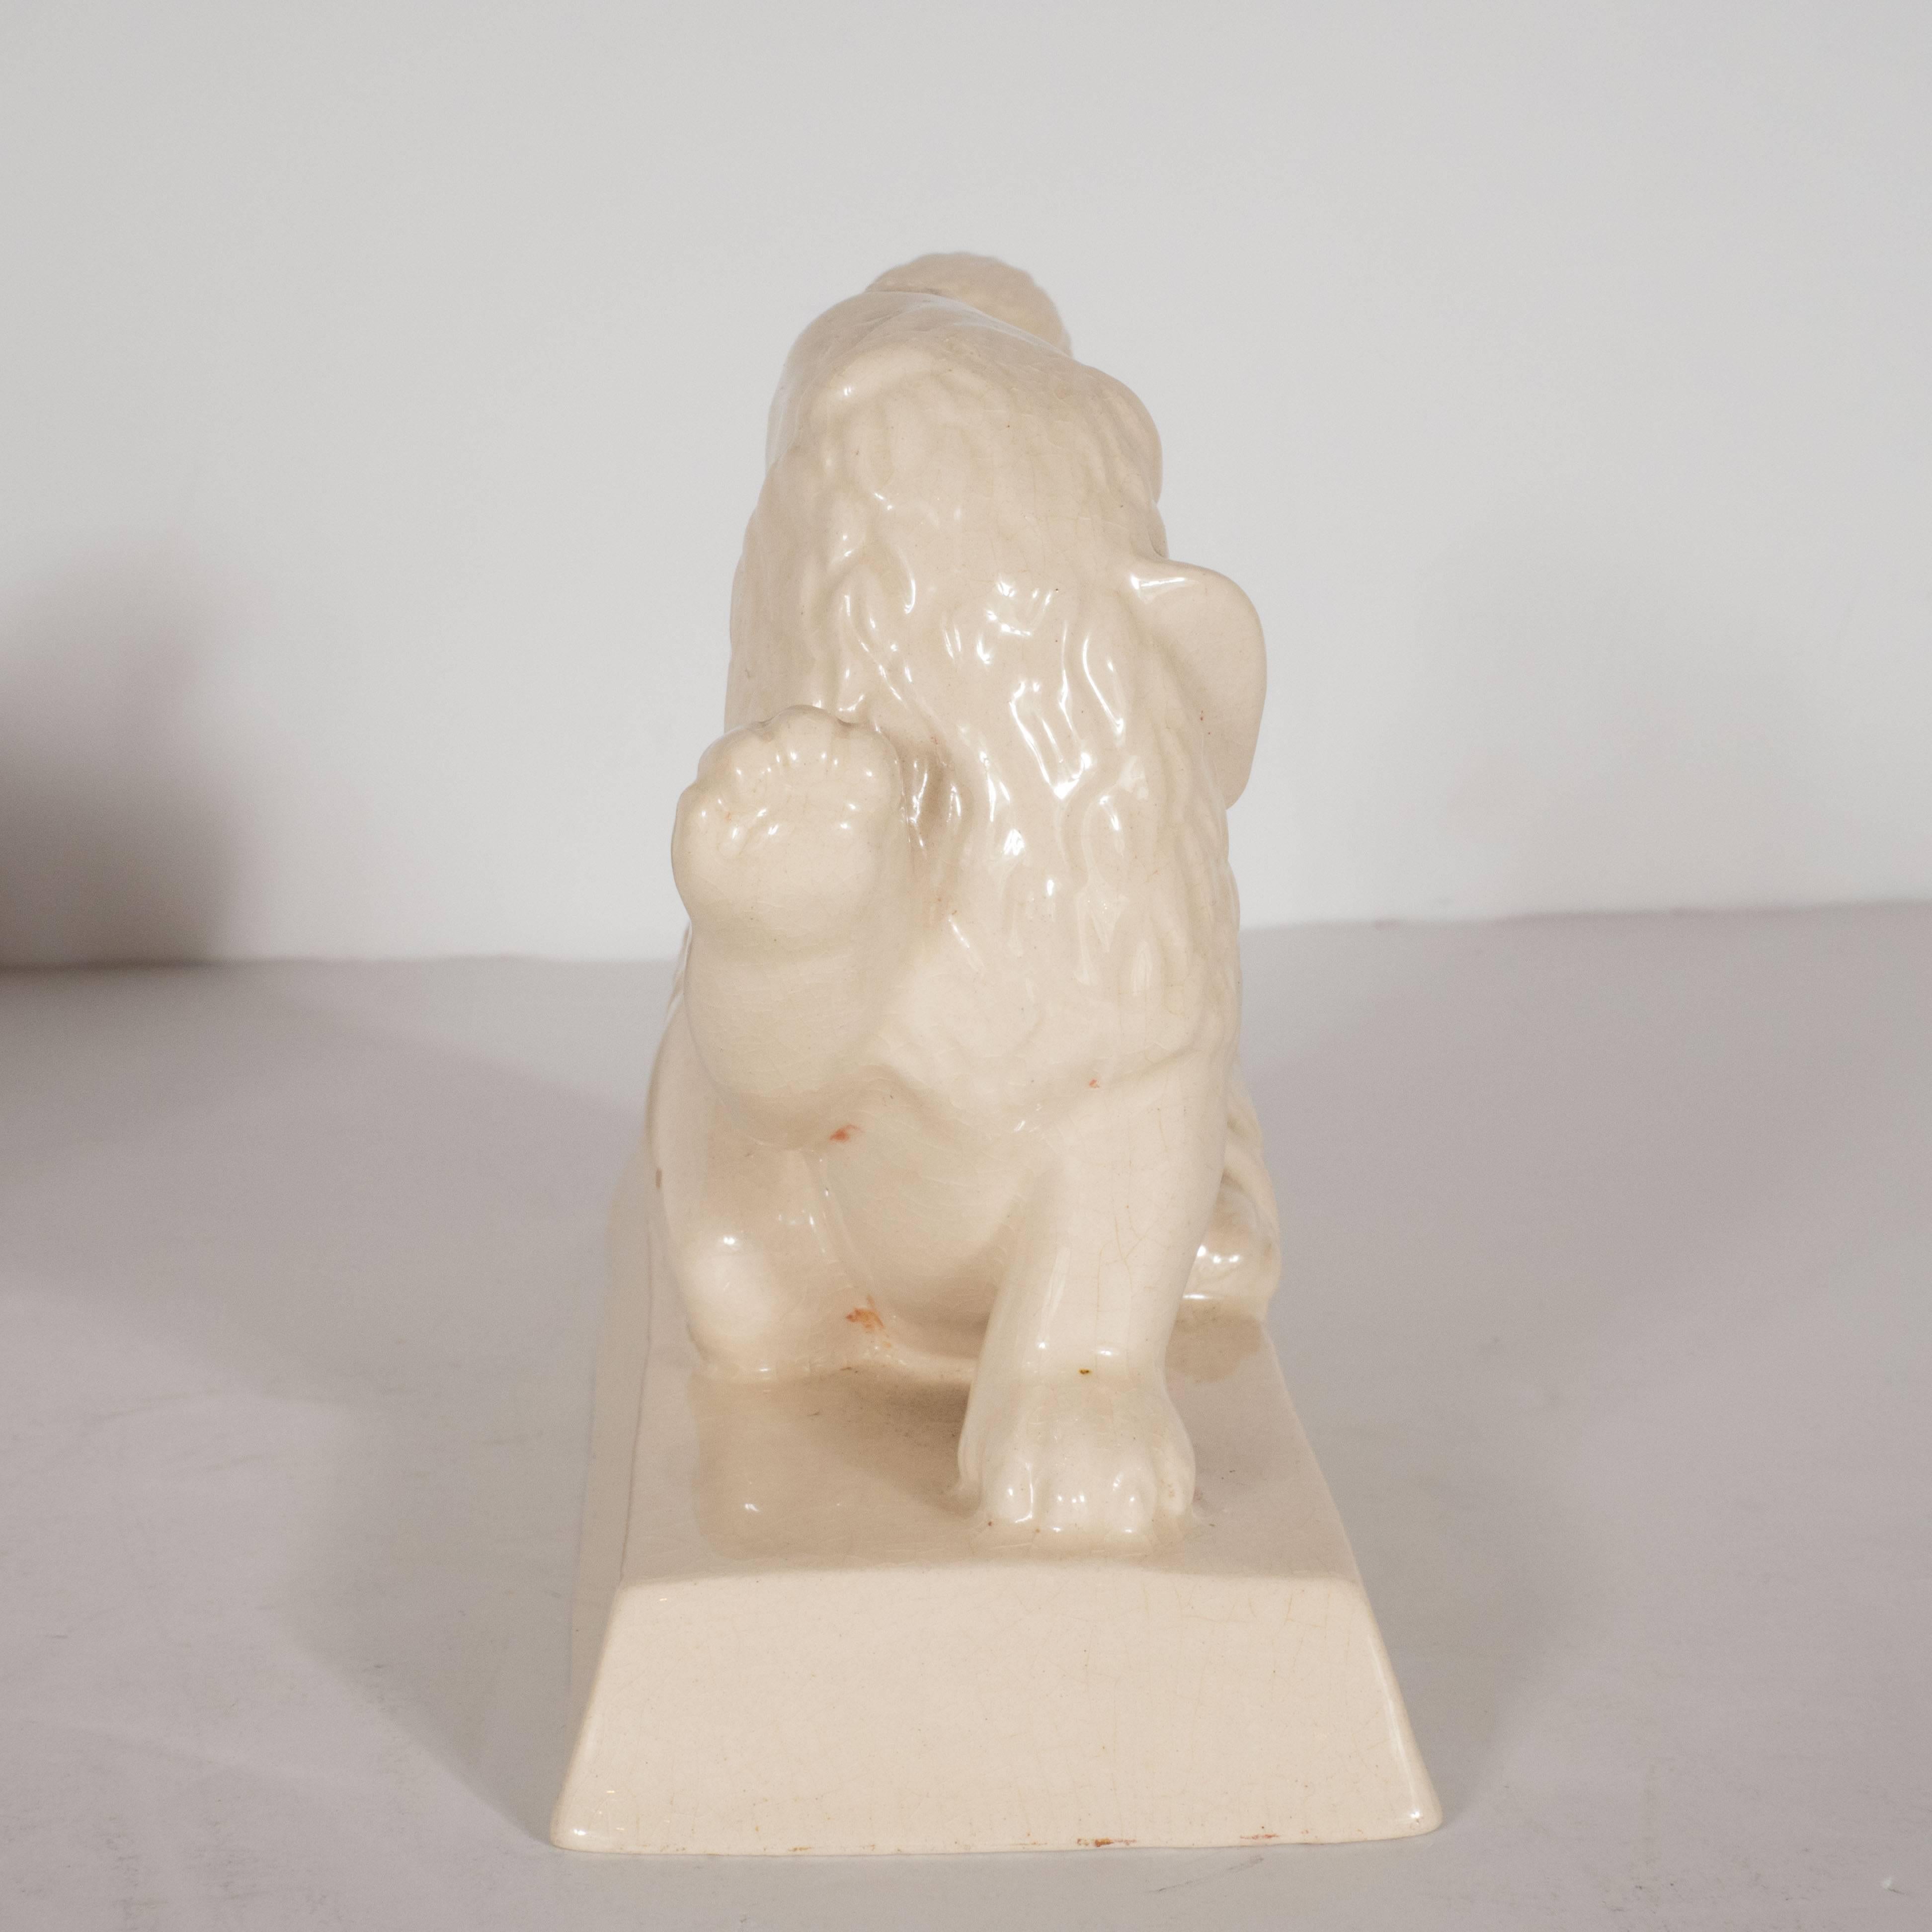 Mid-20th Century Art Deco Ceramic Book Ends Featuring Lion and Nude Female Figure For Sale